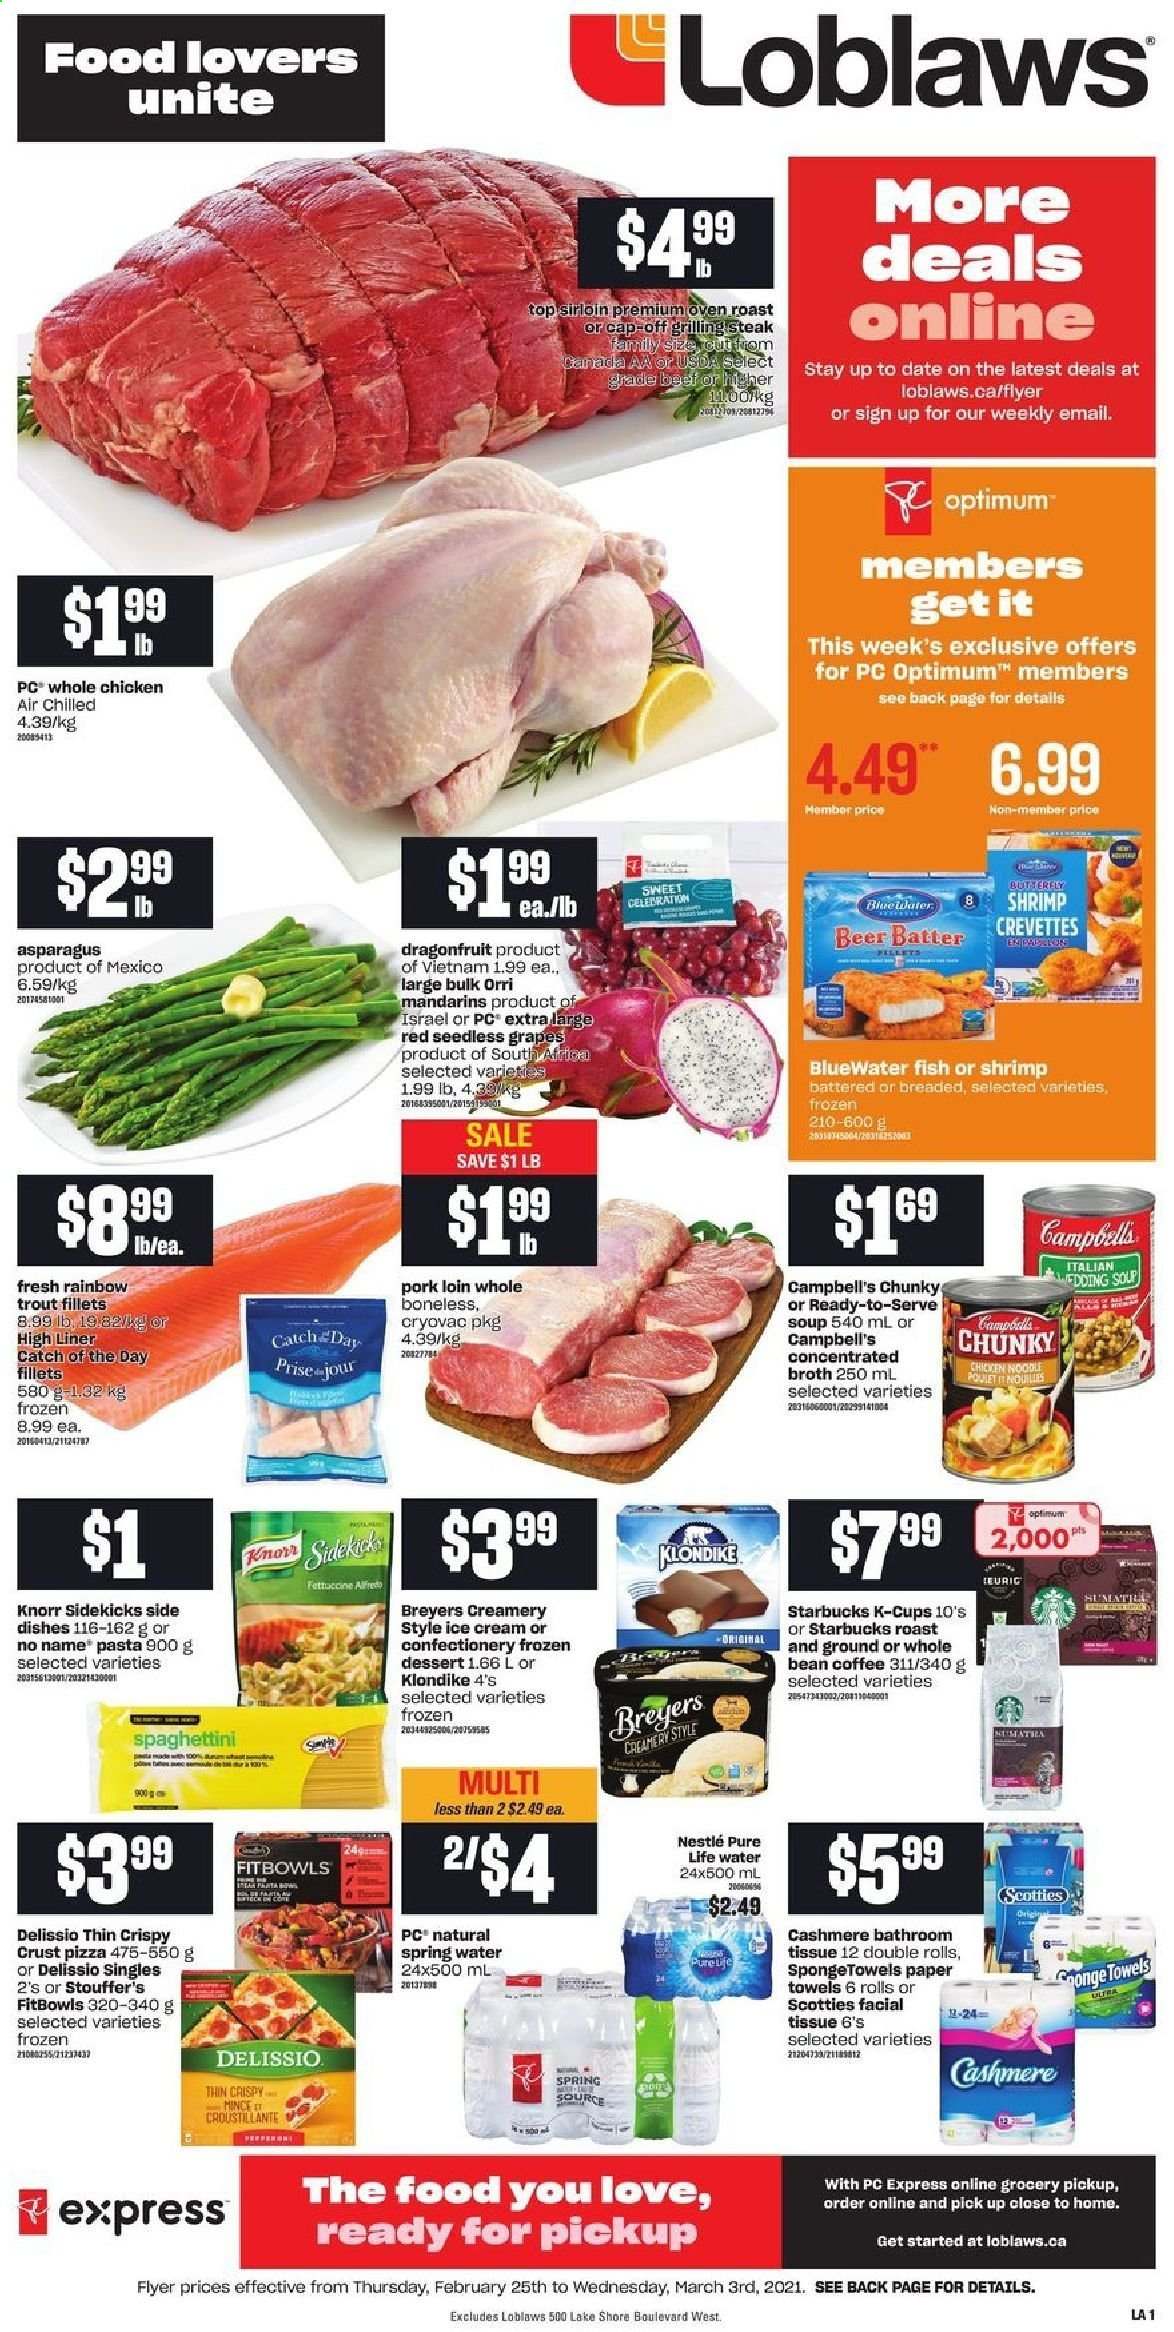 thumbnail - Loblaws Flyer - February 25, 2021 - March 03, 2021 - Sales products - asparagus, grapes, mandarines, seedless grapes, trout, fish, shrimps, No Name, Campbell's, pizza, soup, pasta, noodles, ice cream, Stouffer's, broth, spring water, Pure Life Water, coffee, coffee capsules, Starbucks, K-Cups, beer, whole chicken, chicken, pork loin, pork meat, bath tissue, kitchen towels, paper towels, Optimum, Knorr, Nestlé, steak. Page 1.